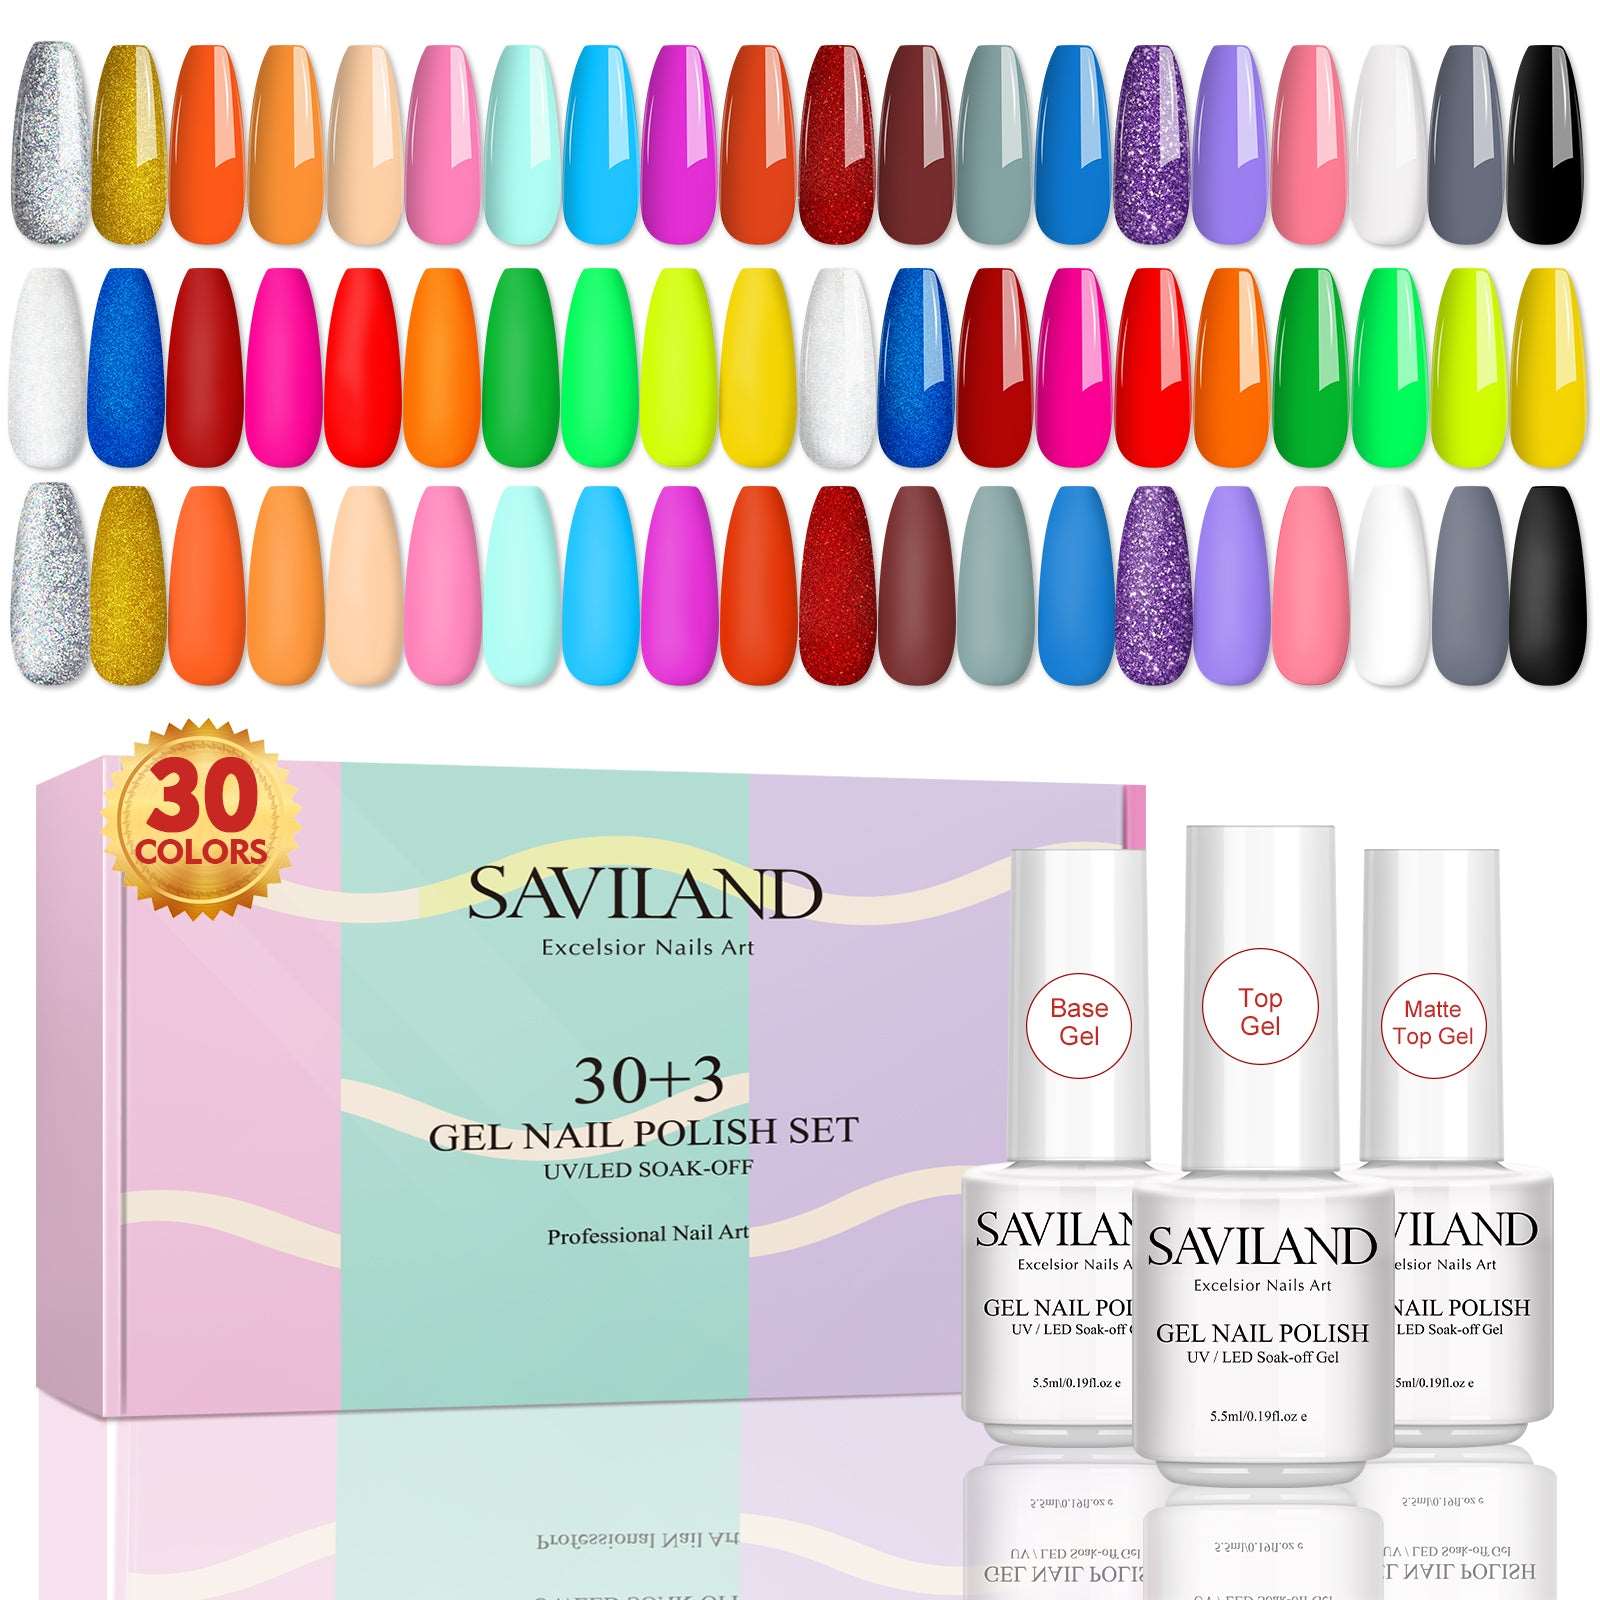 Is this a good starter kit to do gel nails at home? (Beetles gel nail polish  48W UV lamp) : r/Nails